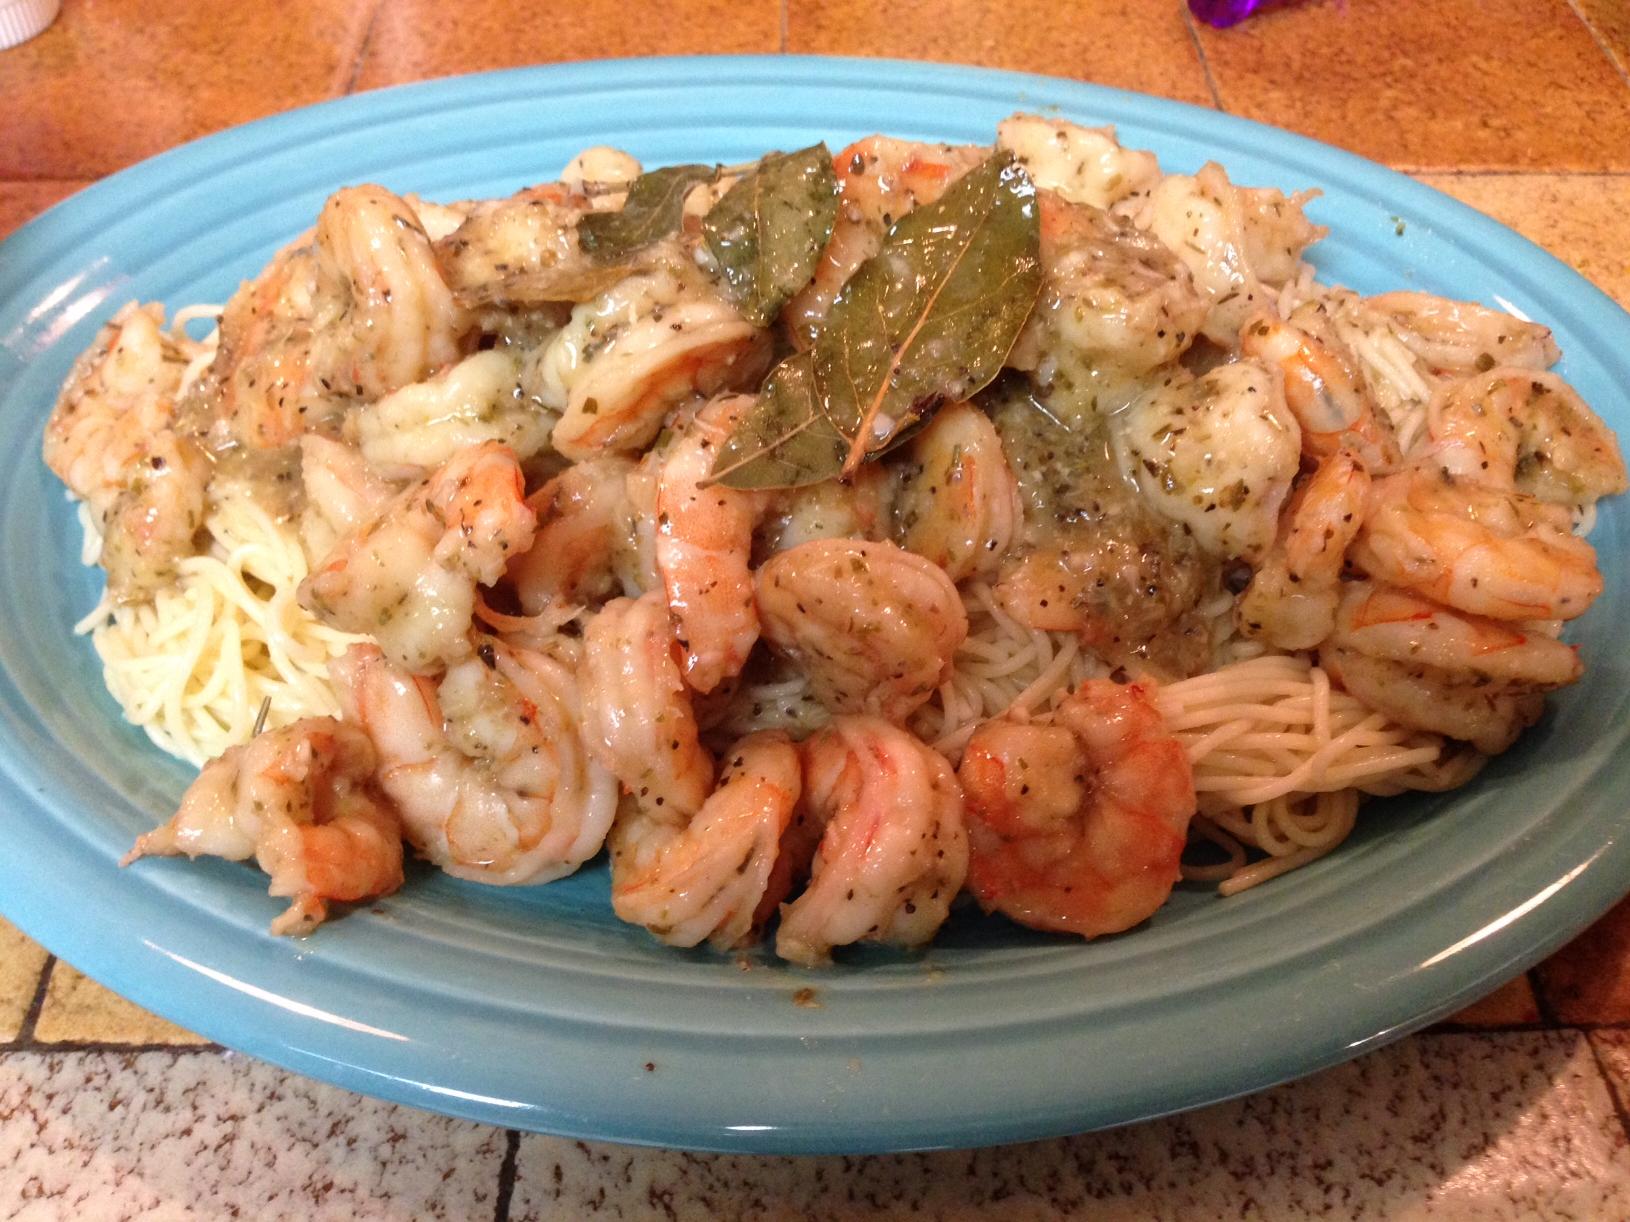 Delicious Shrimp Mosca Recipe that Will Leave You Satisfied